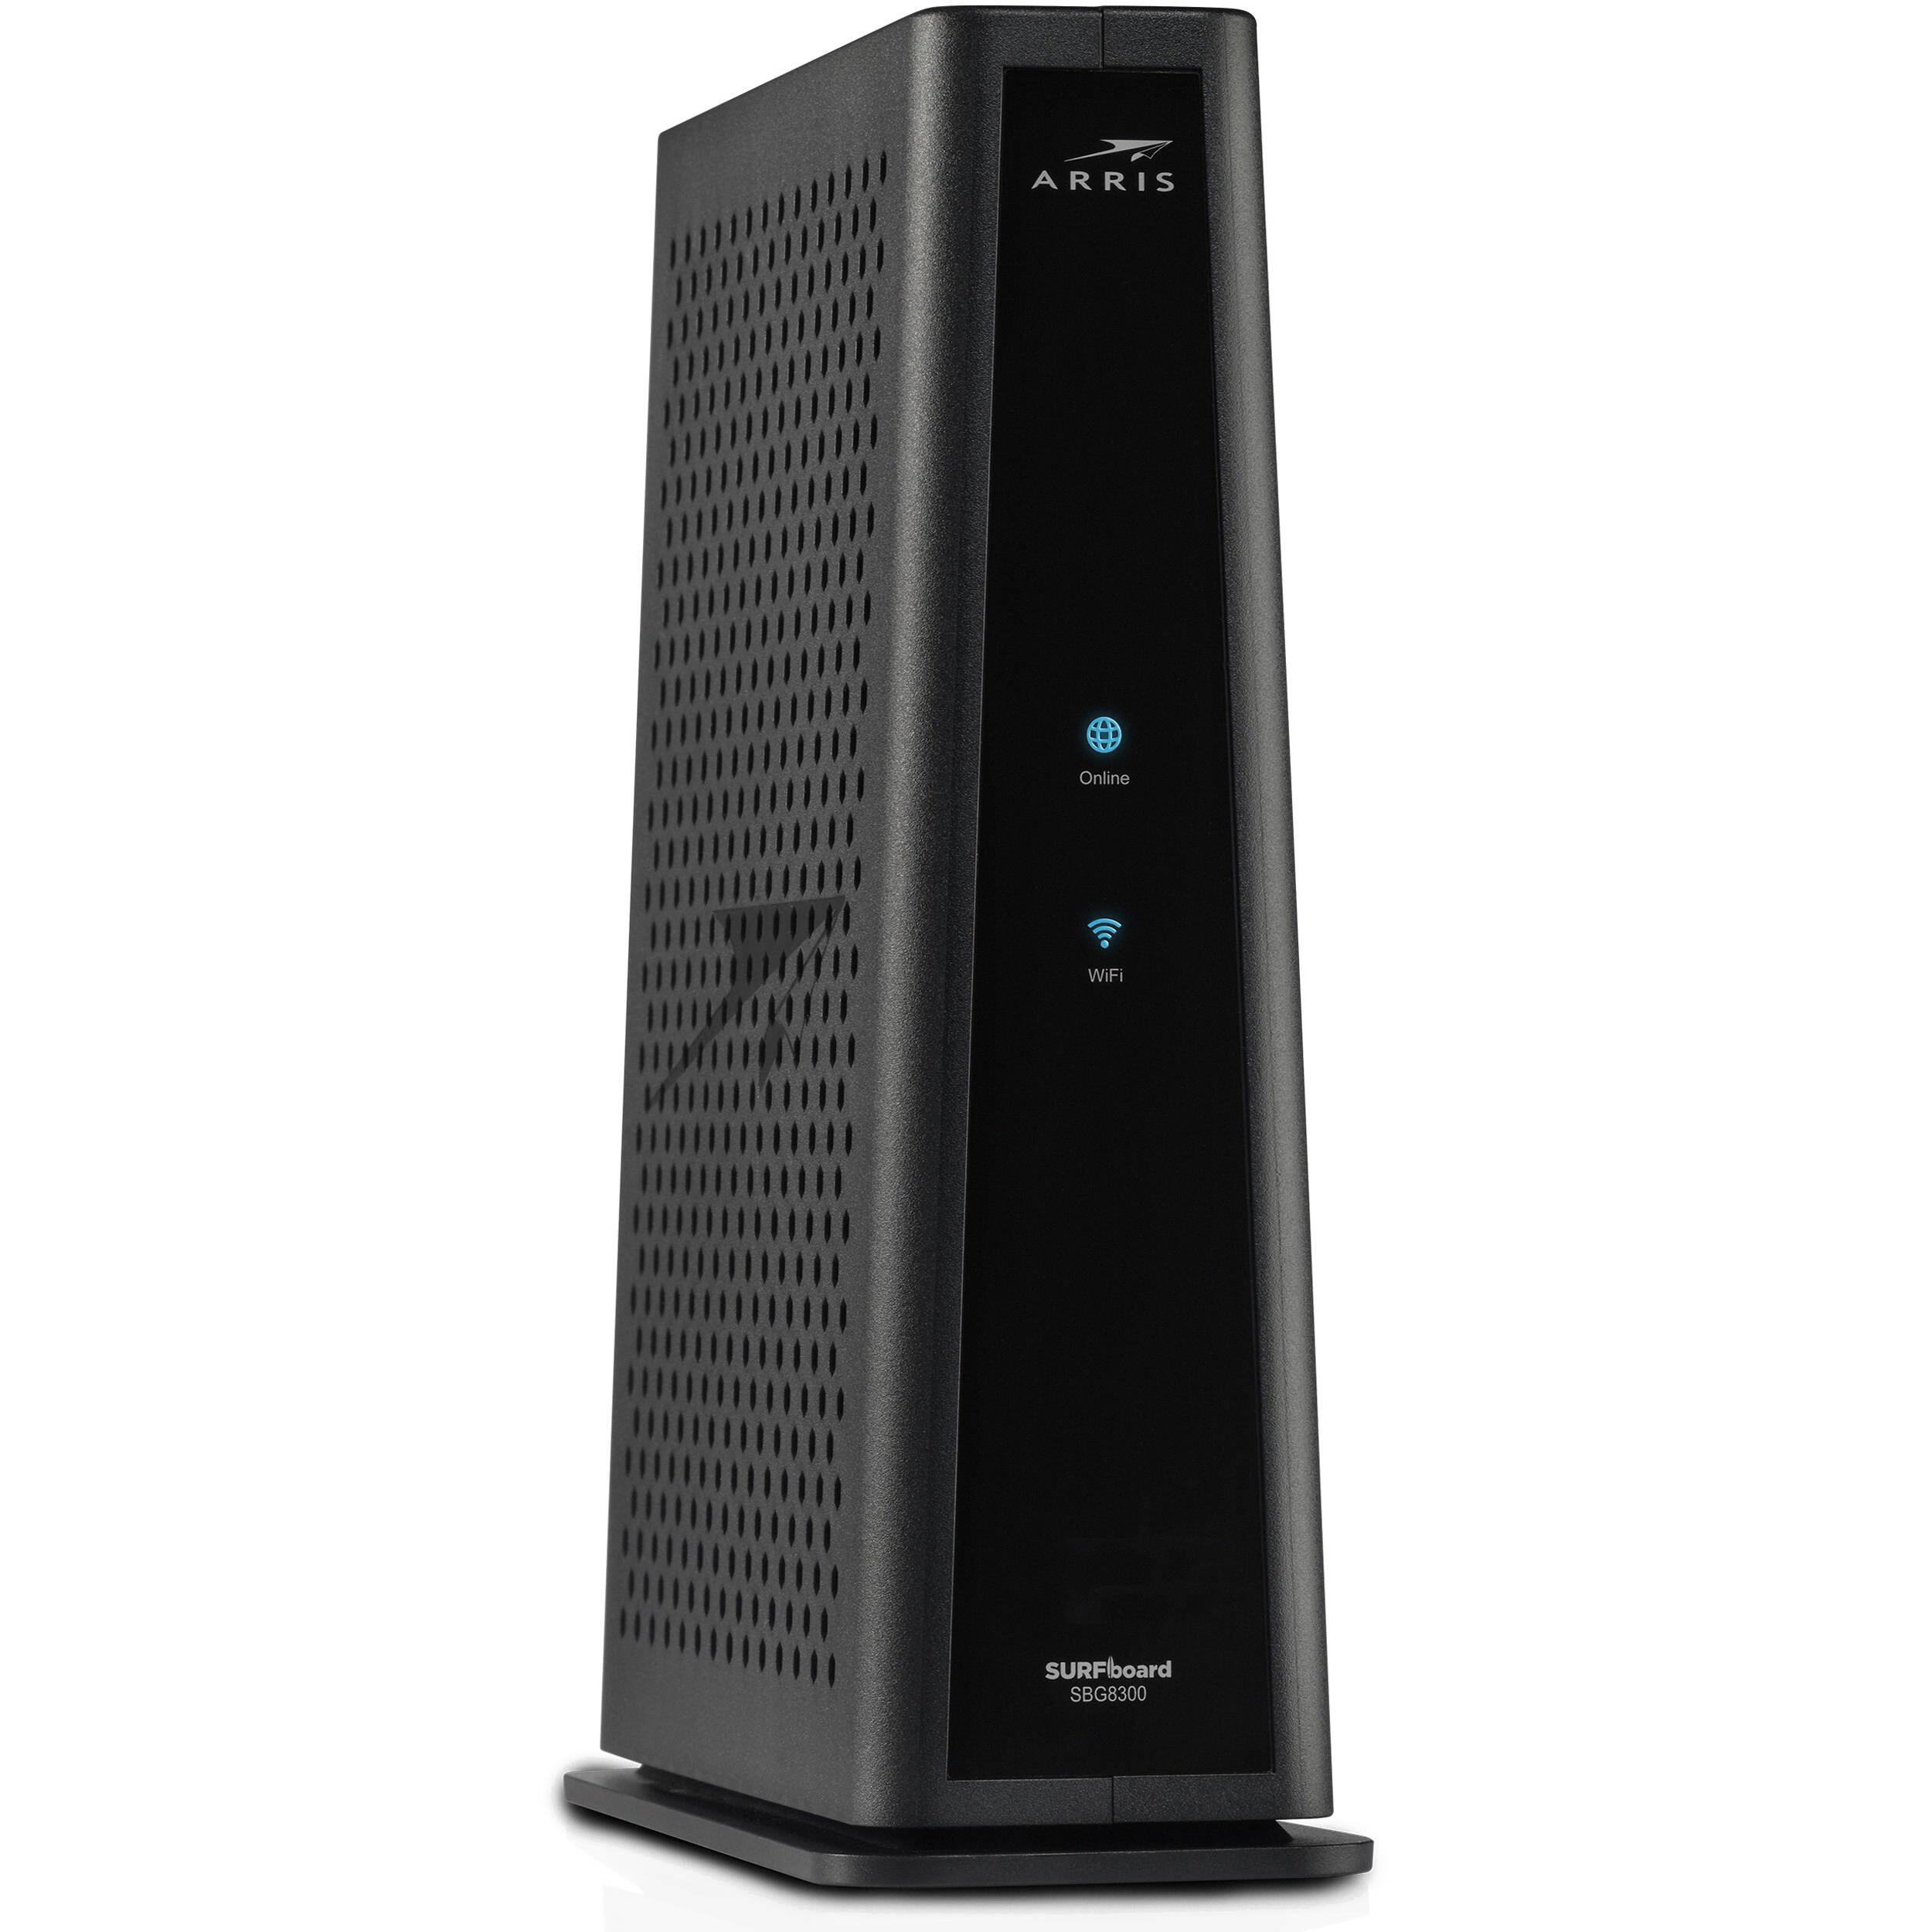 A Comprehensive Review of SBG8300 Cable Modem and Wi-Fi Router 11